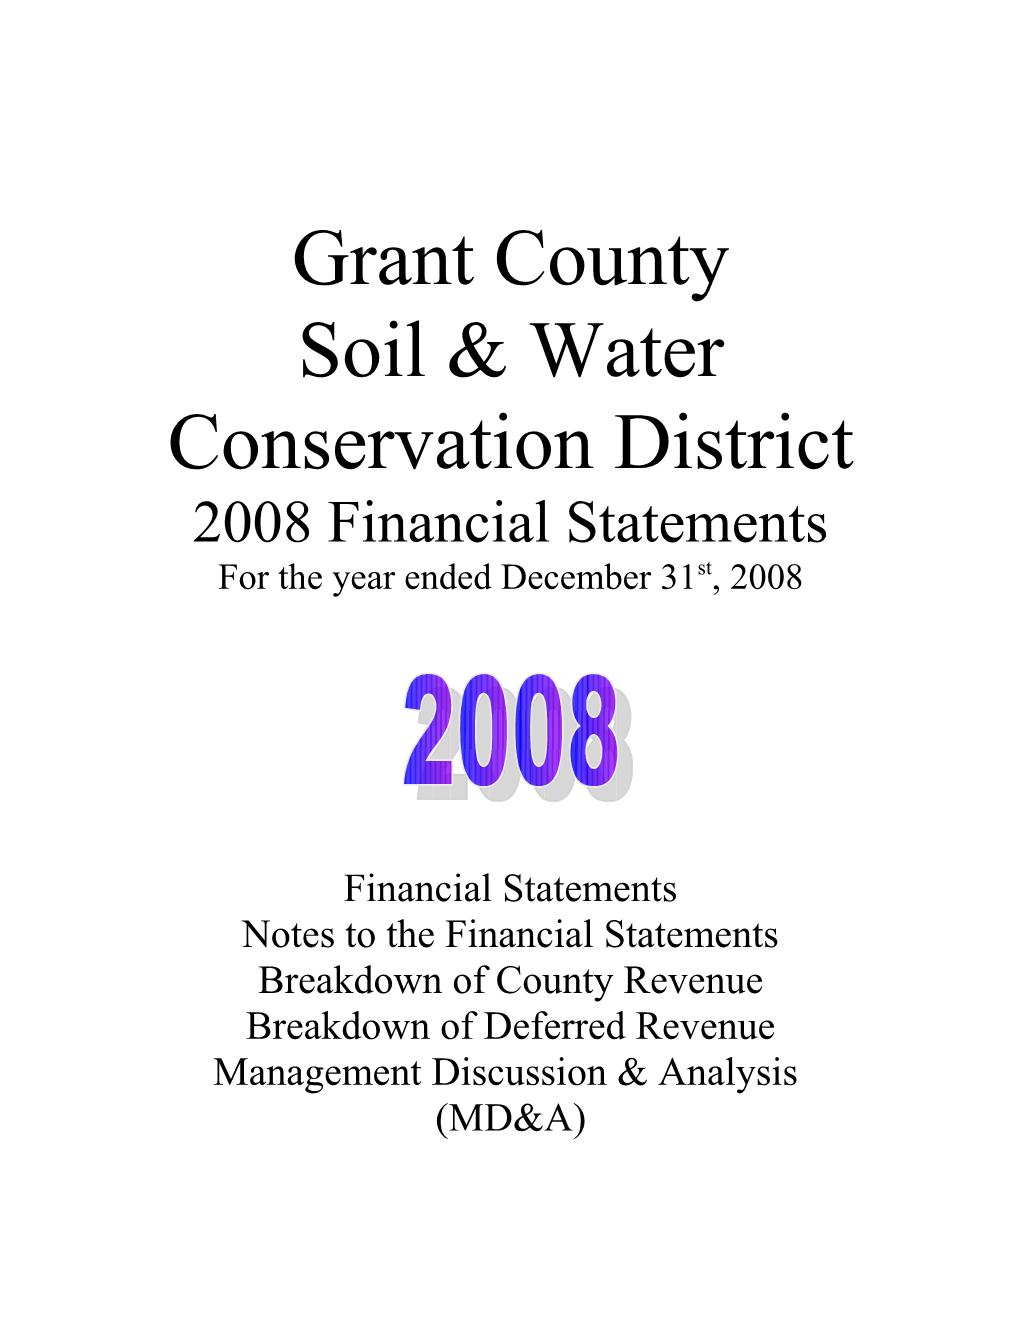 Grant Soil & Water Conservation District